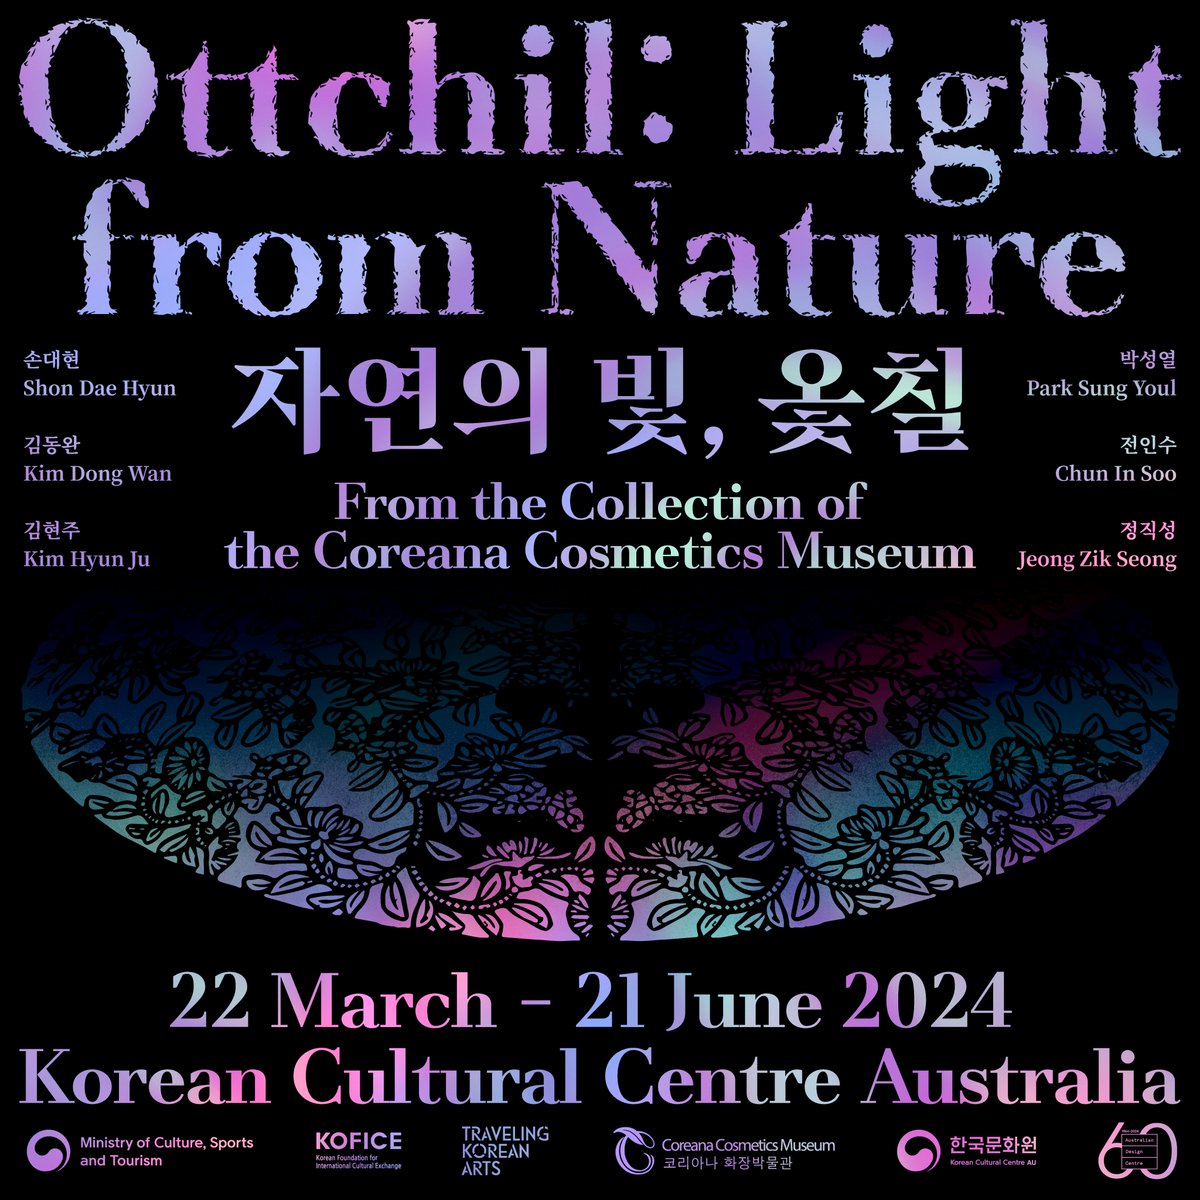 KCC's new exhibition is just around the corner! Presented in partnership with Coreana Cosmetic Museum and Australian Design Centre, Korean Cultural Centre Australia unveils two special exhibitions in Sydney. koreanculture.org.au/ottchil-light-…